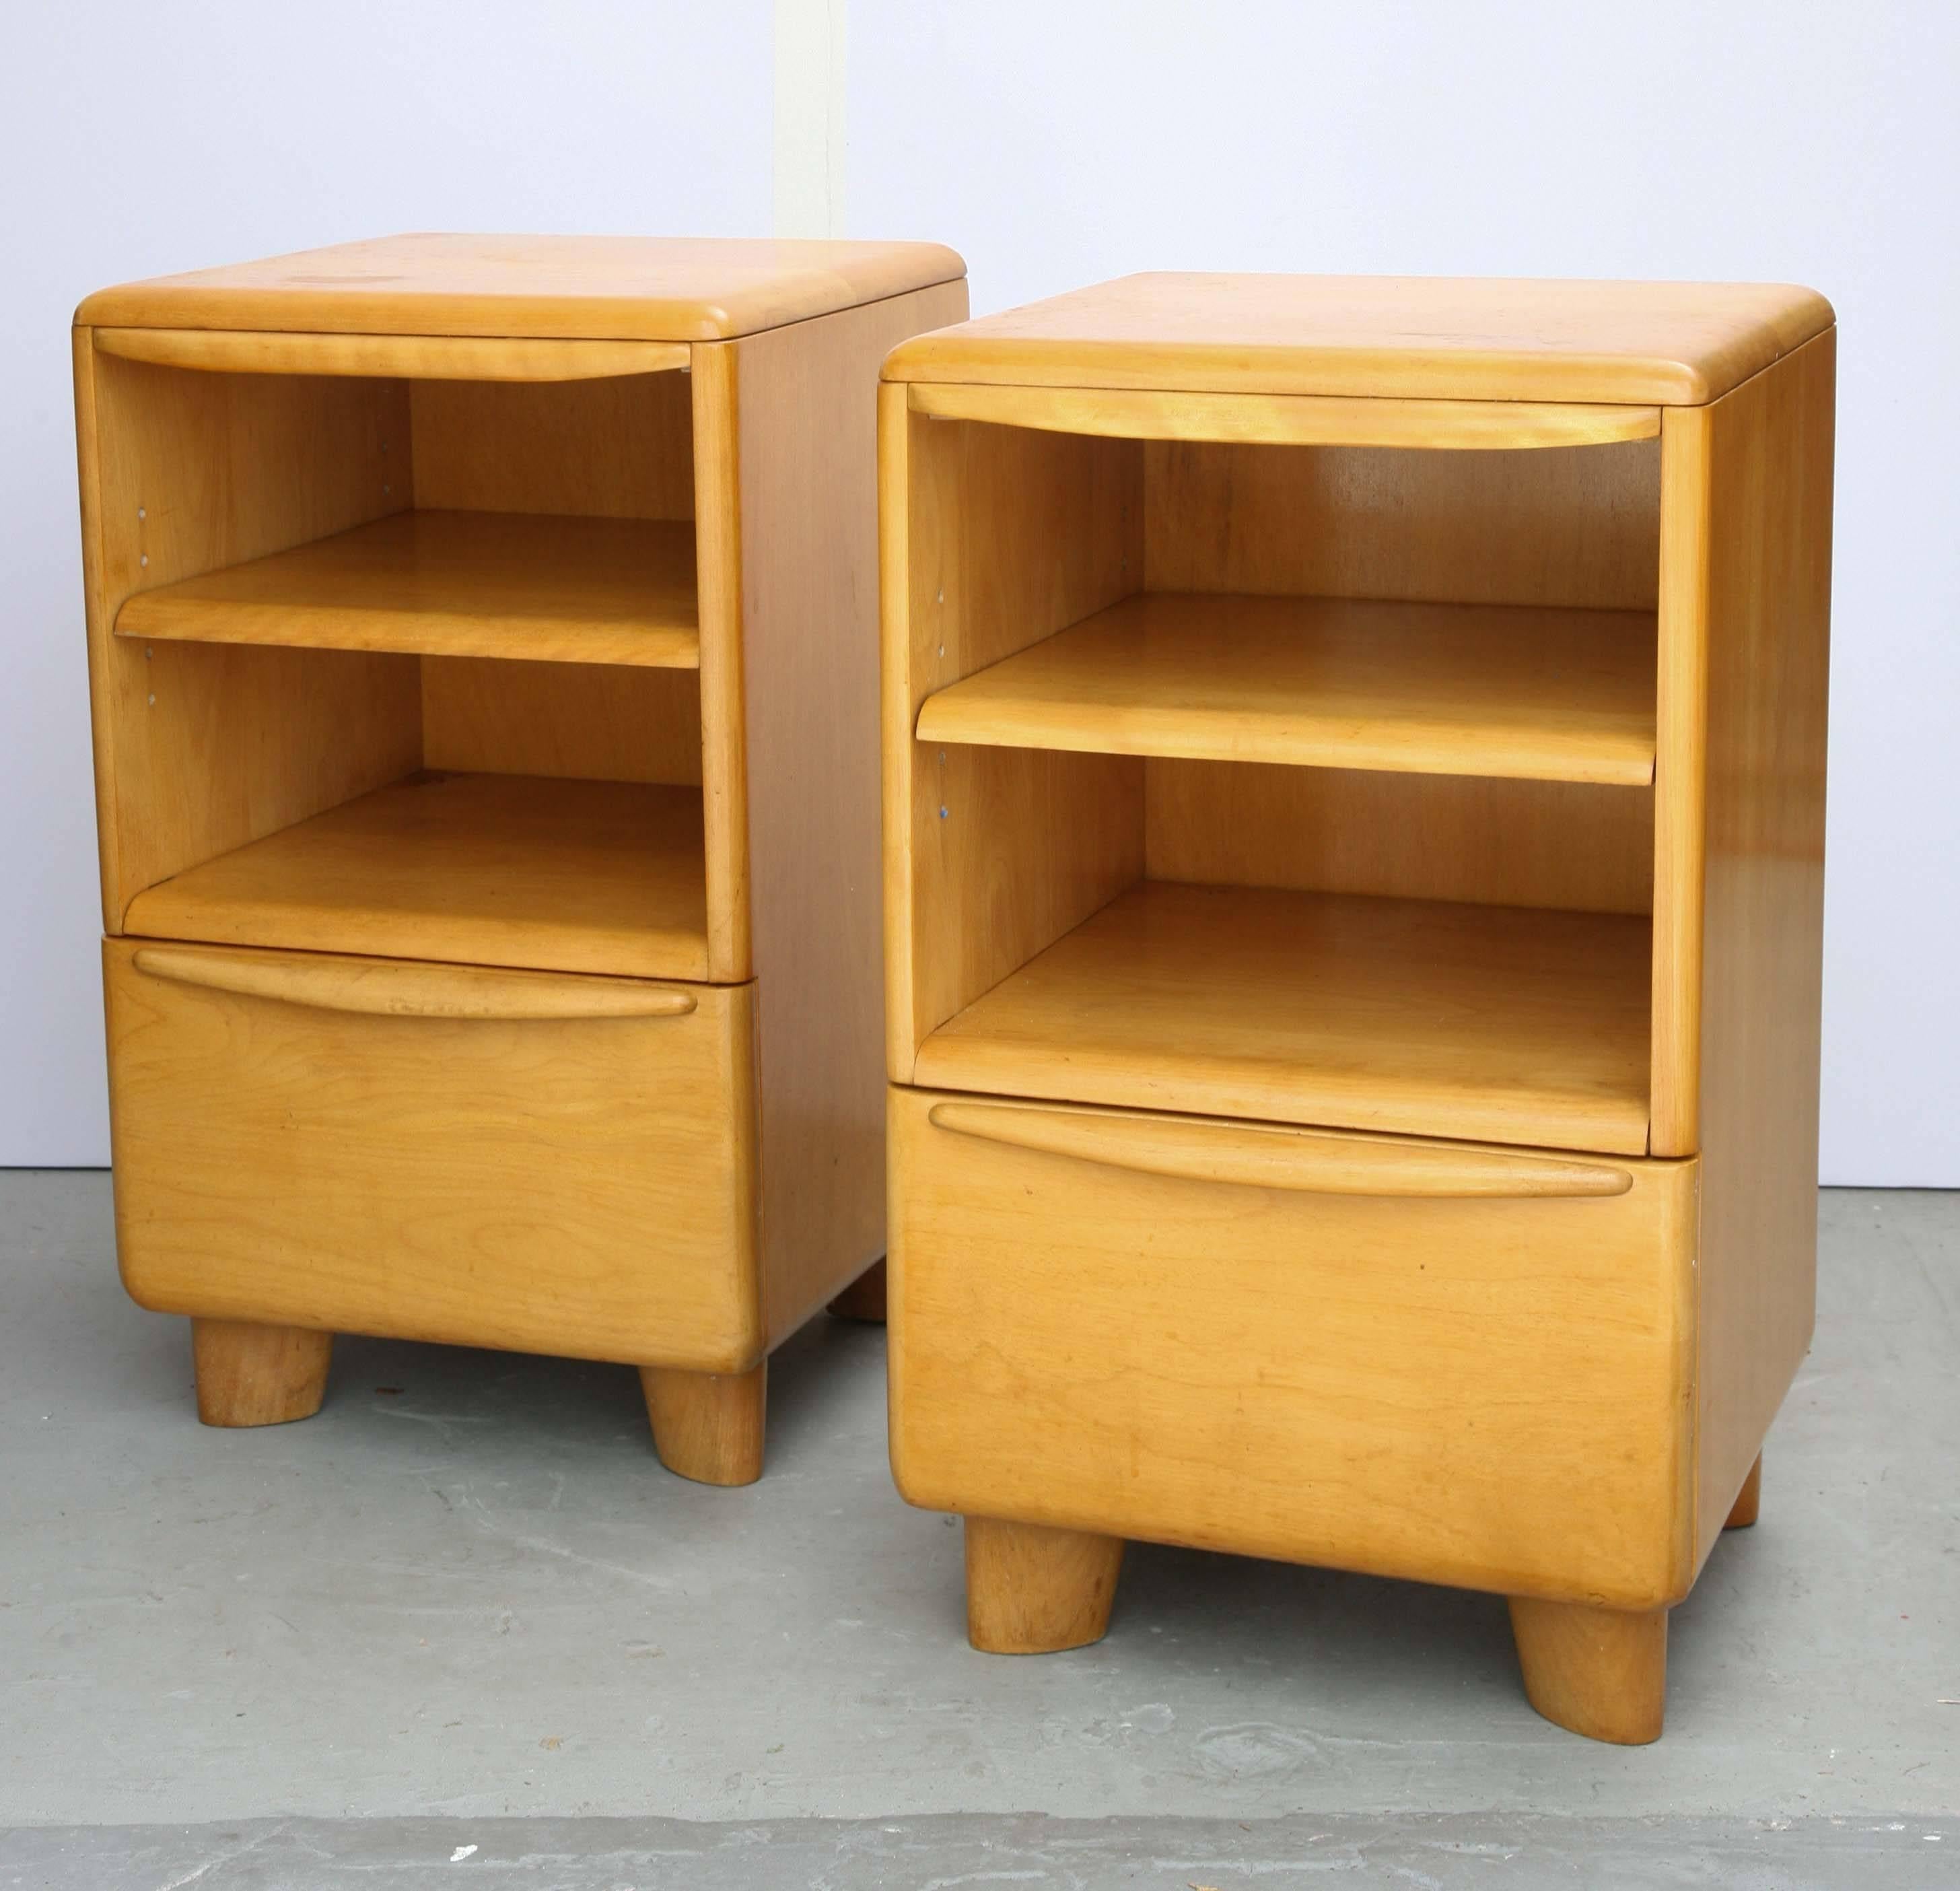 Pair of Heywood-Wakefield nightstands with shelves and drawers in very good vintage original shape, USA, 1960s.